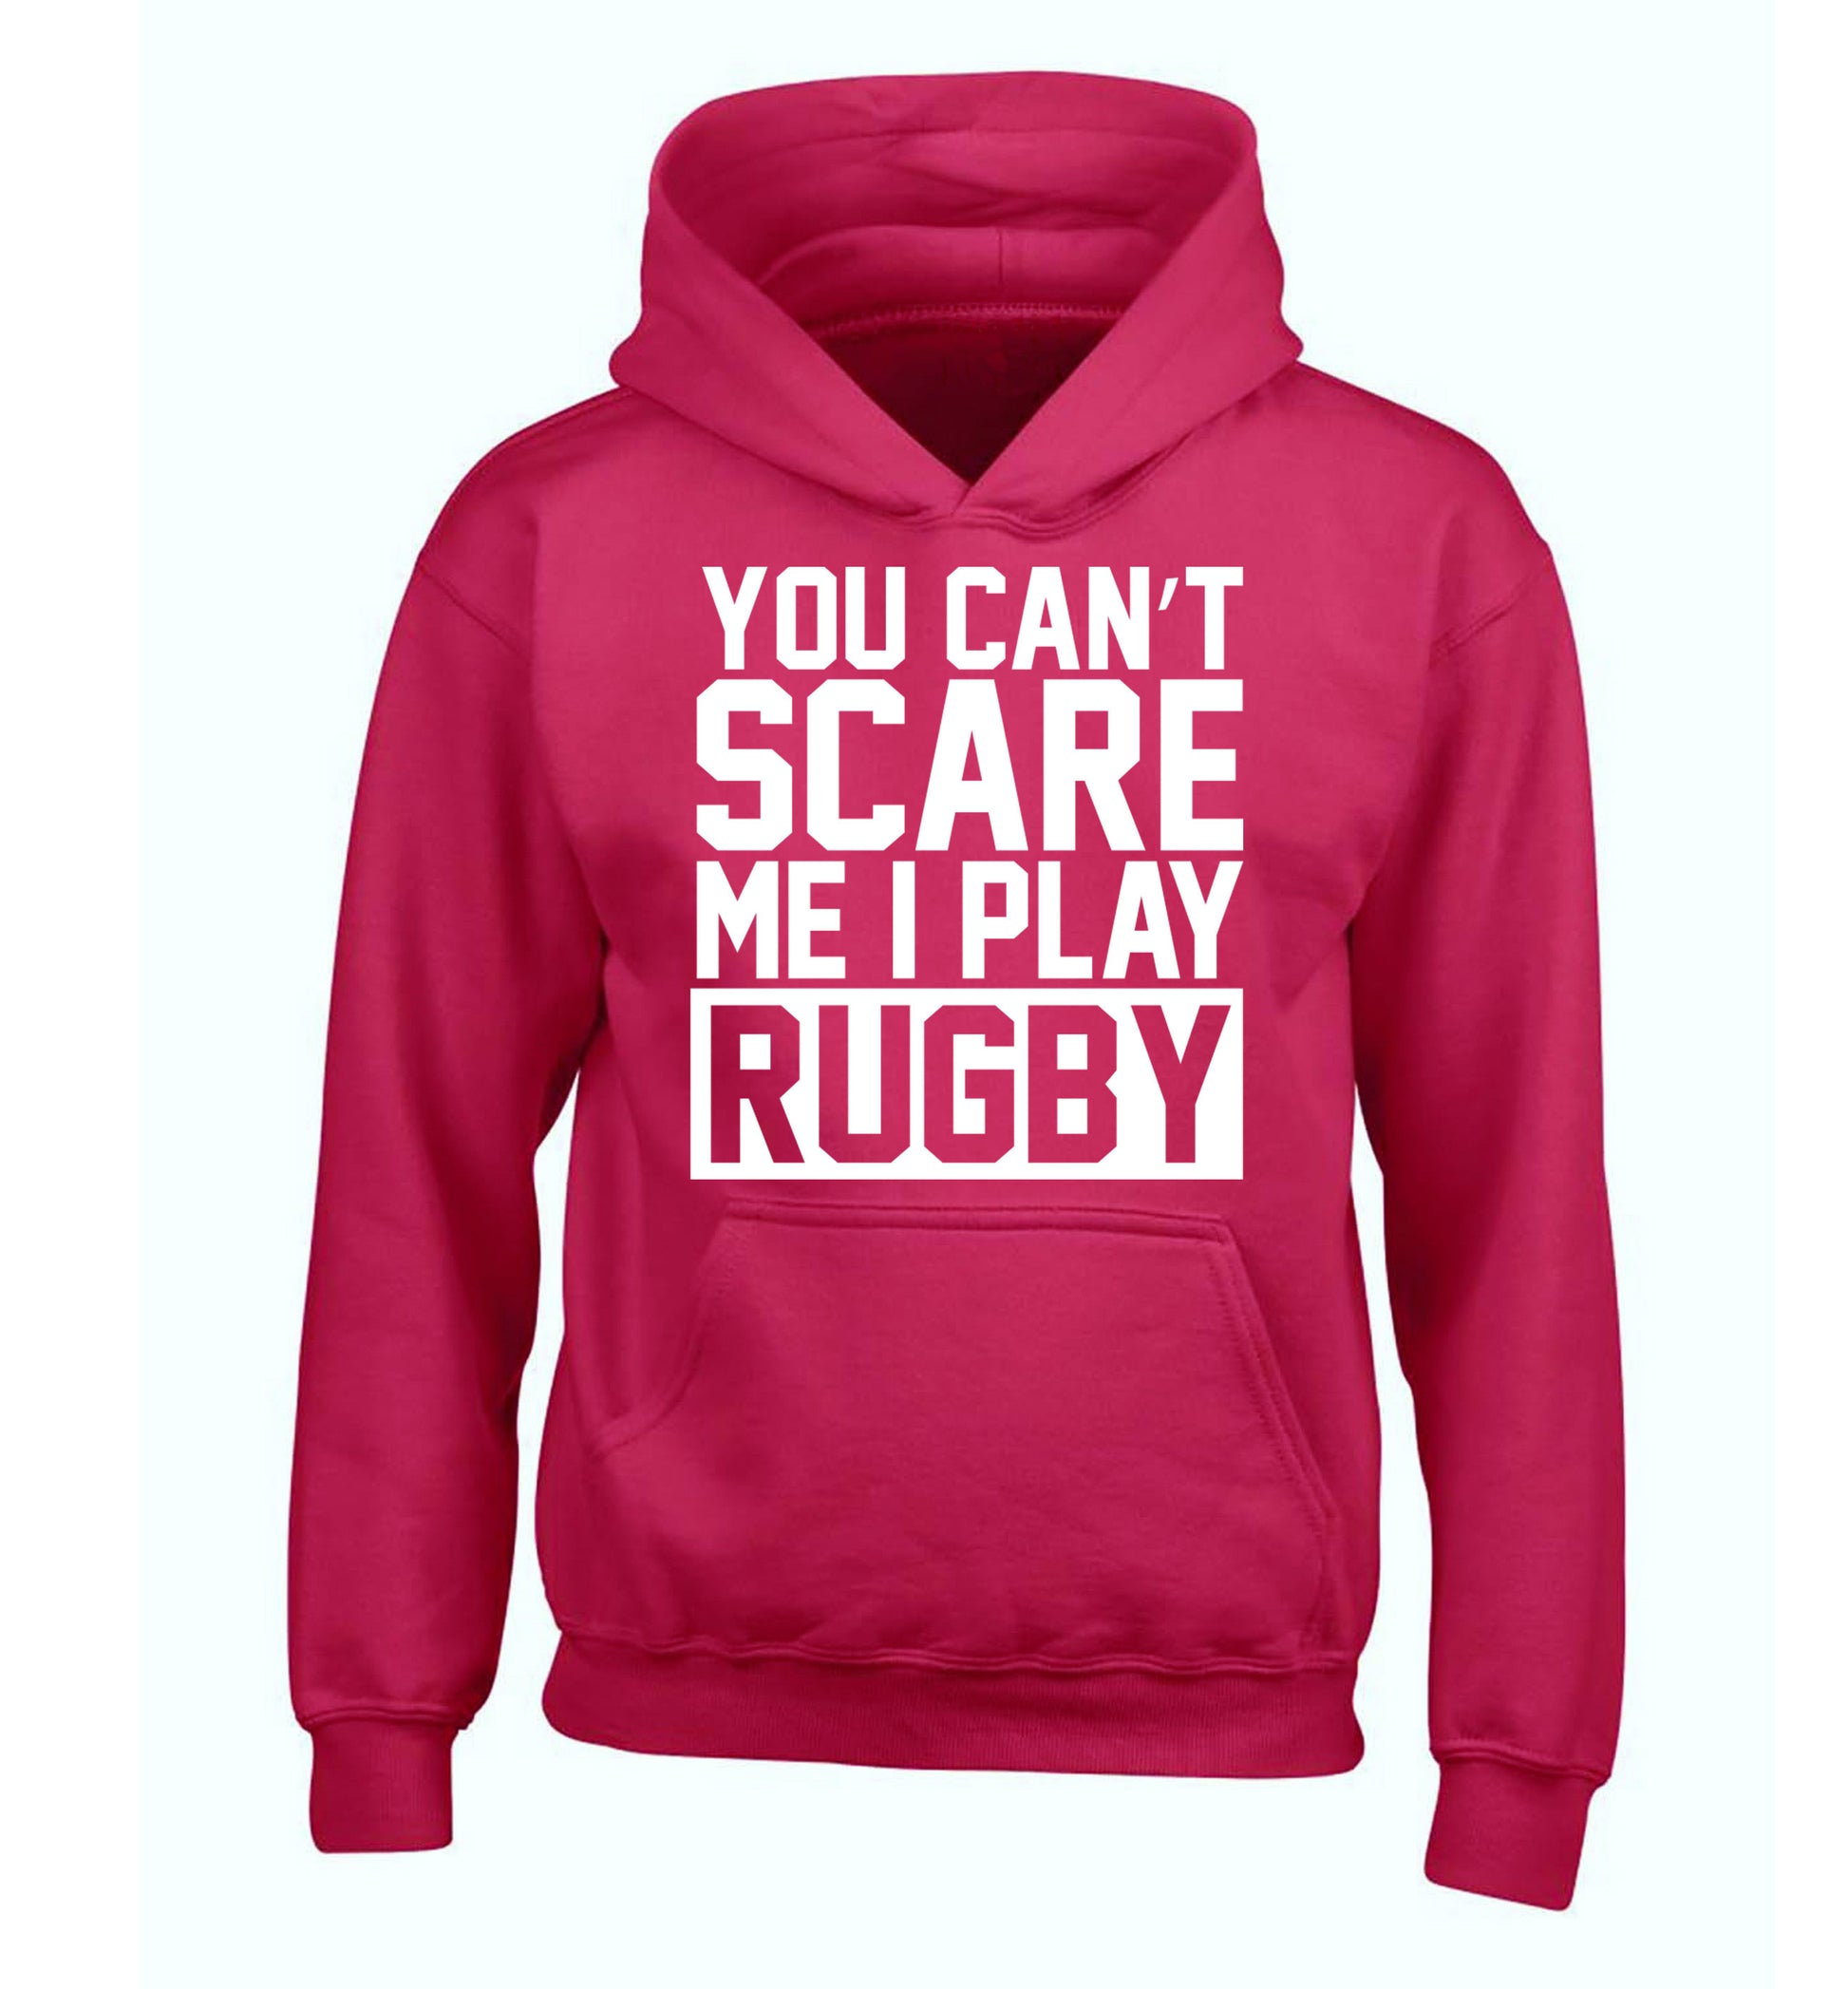 You can't scare me I play rugby children's pink hoodie 12-14 Years